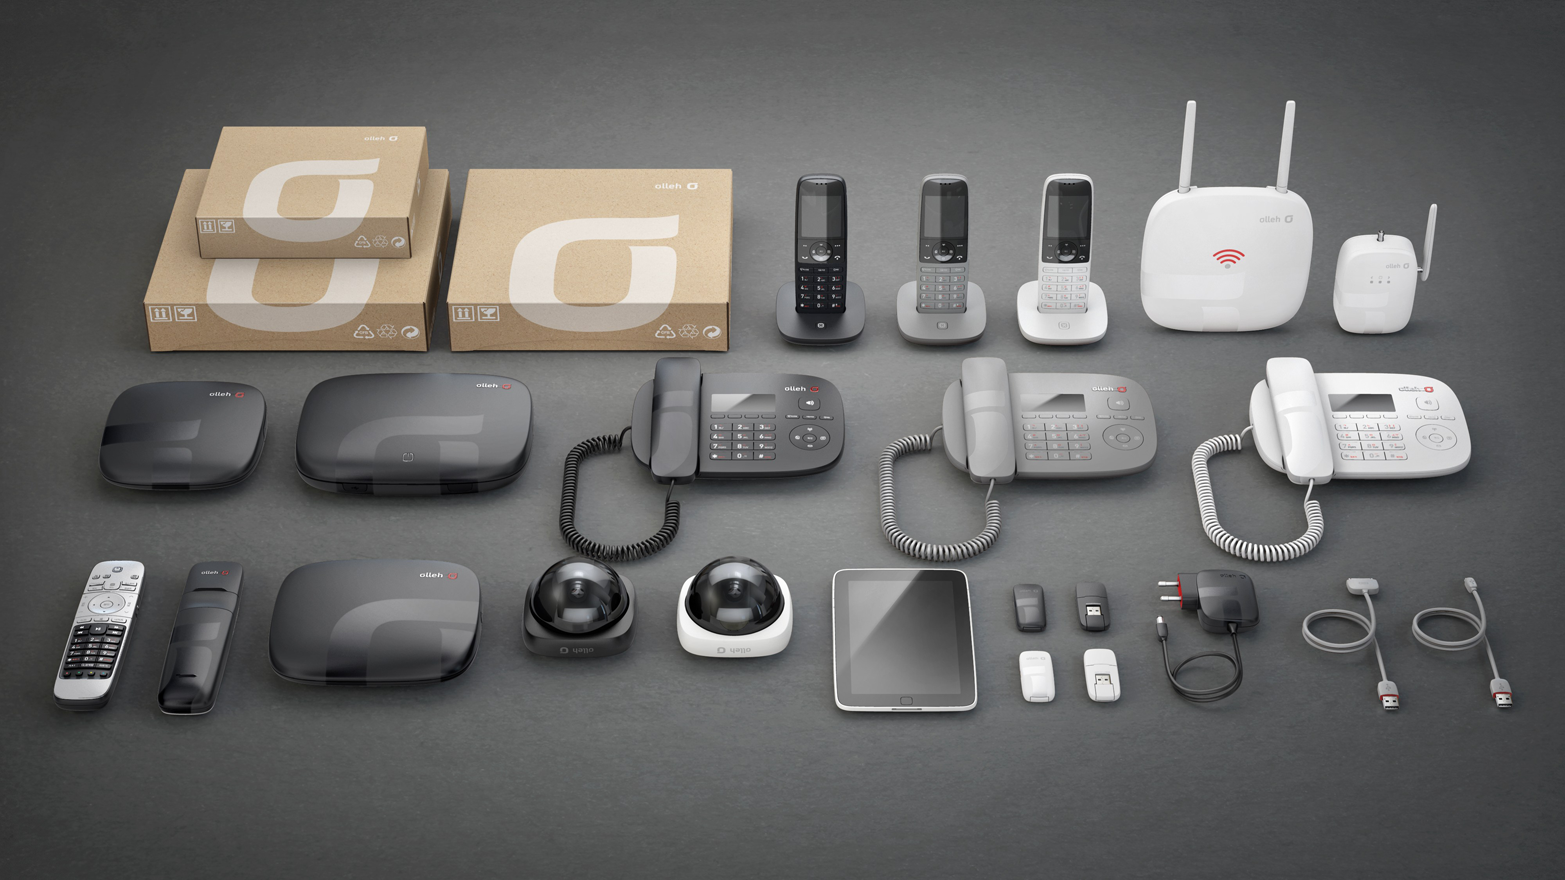 Korea Telecom range of products unified by a common design language (image: Seymourpowell).